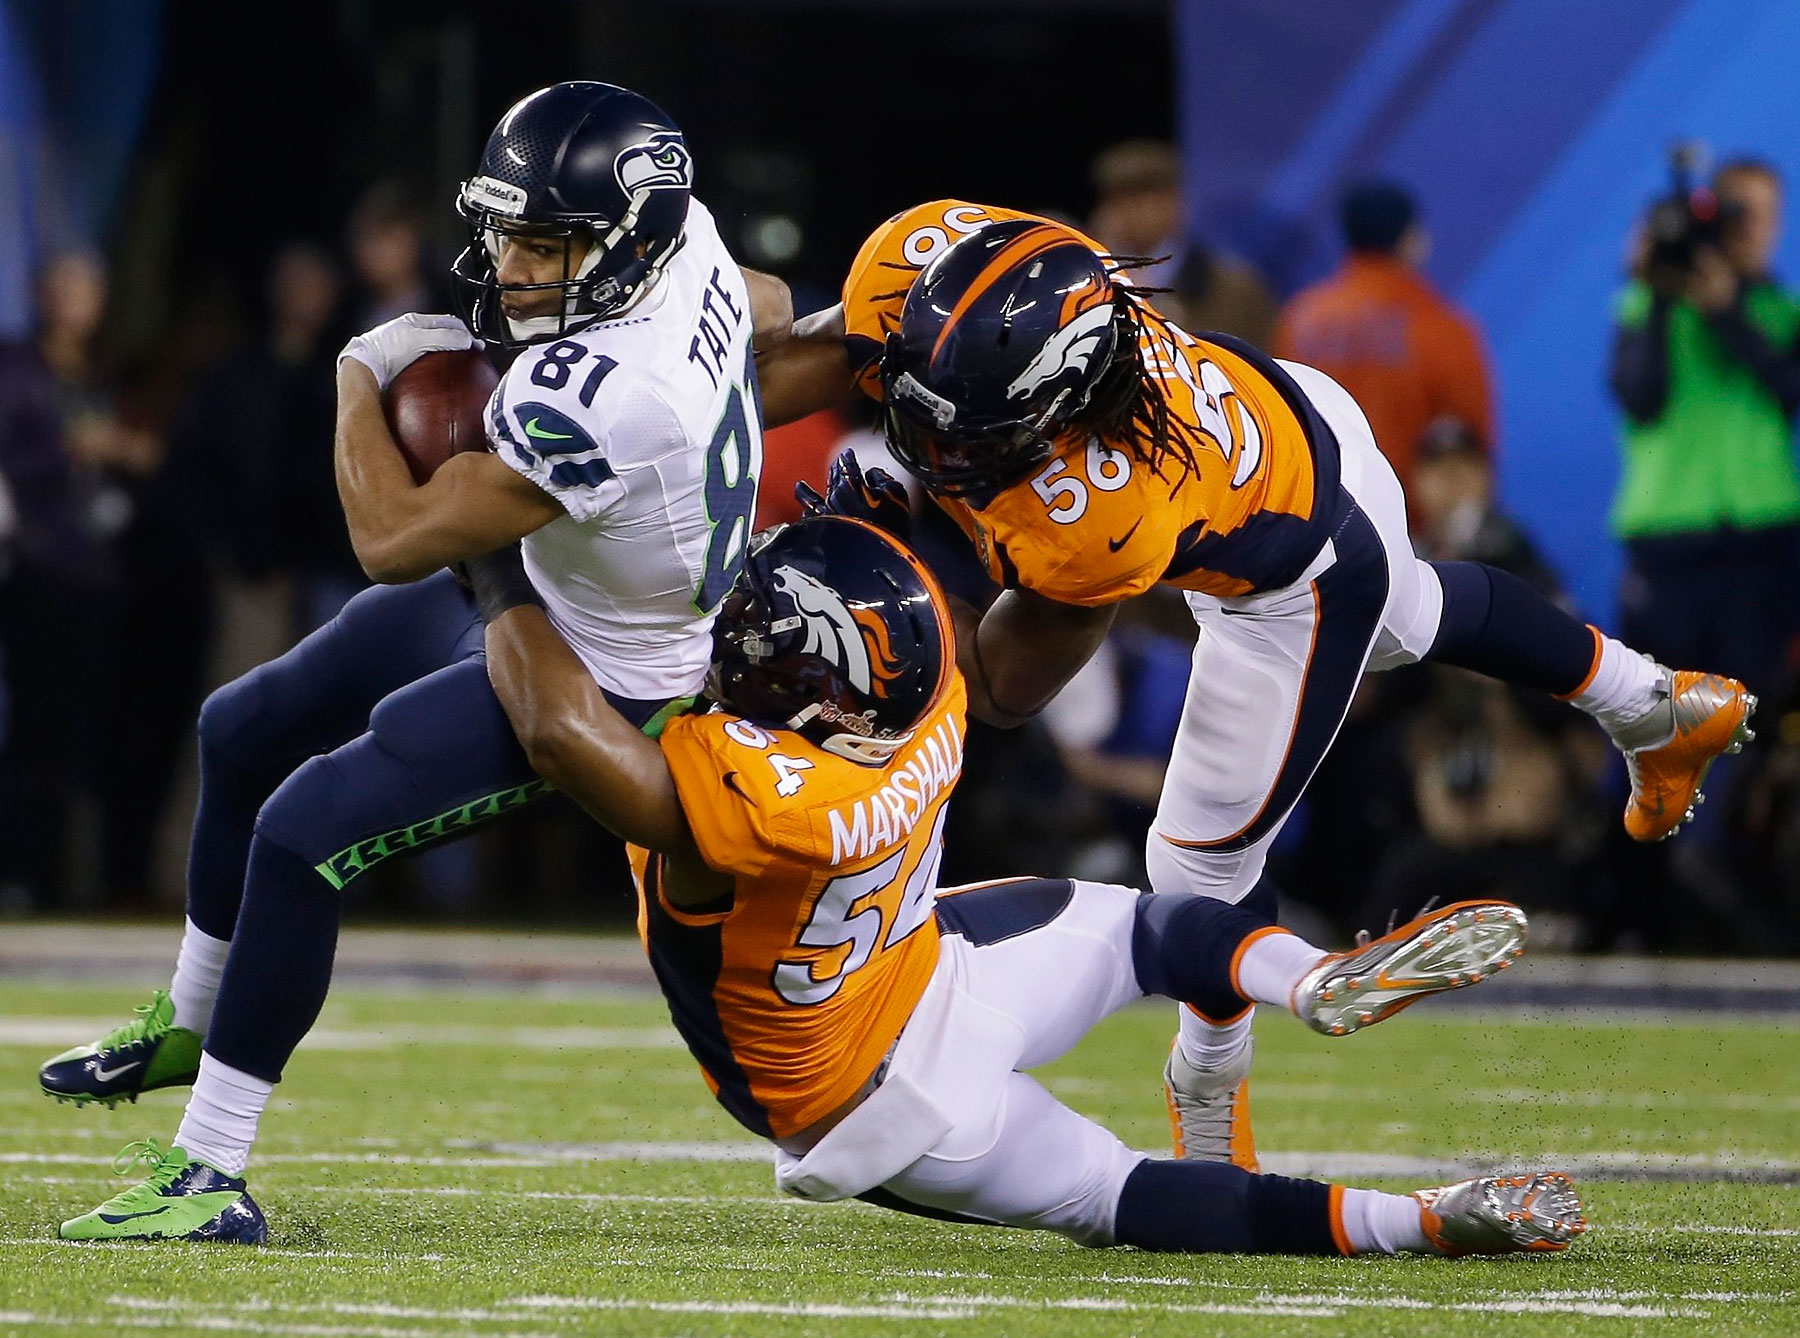 Seattle Seahawks' Golden Tate is tackled by Denver Broncos' Brandon Marshall and Nate Irving during the first quarter.